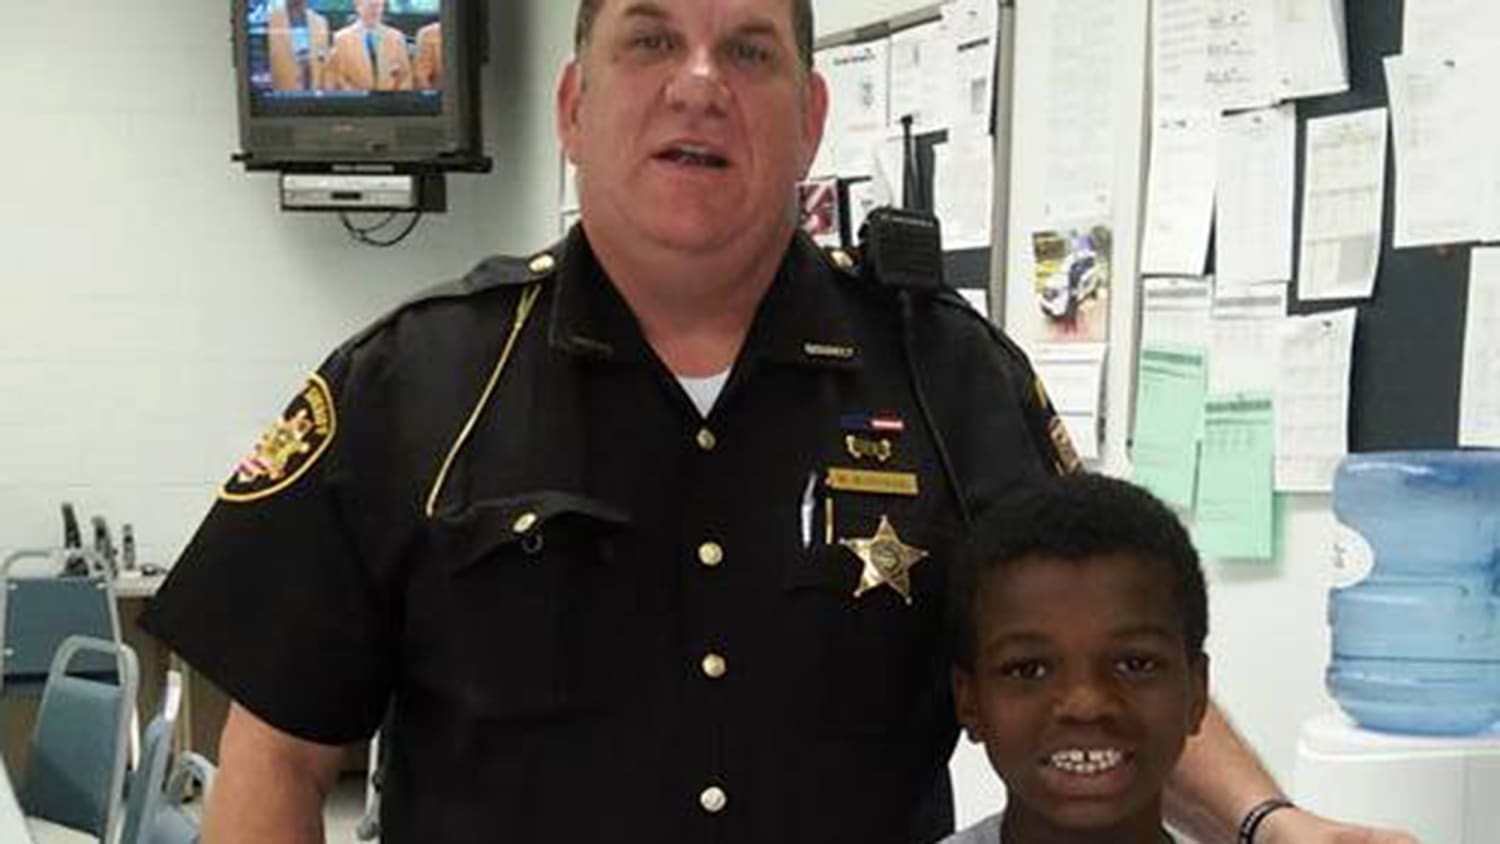 Ohio police officer goes above the call of duty for homeless family